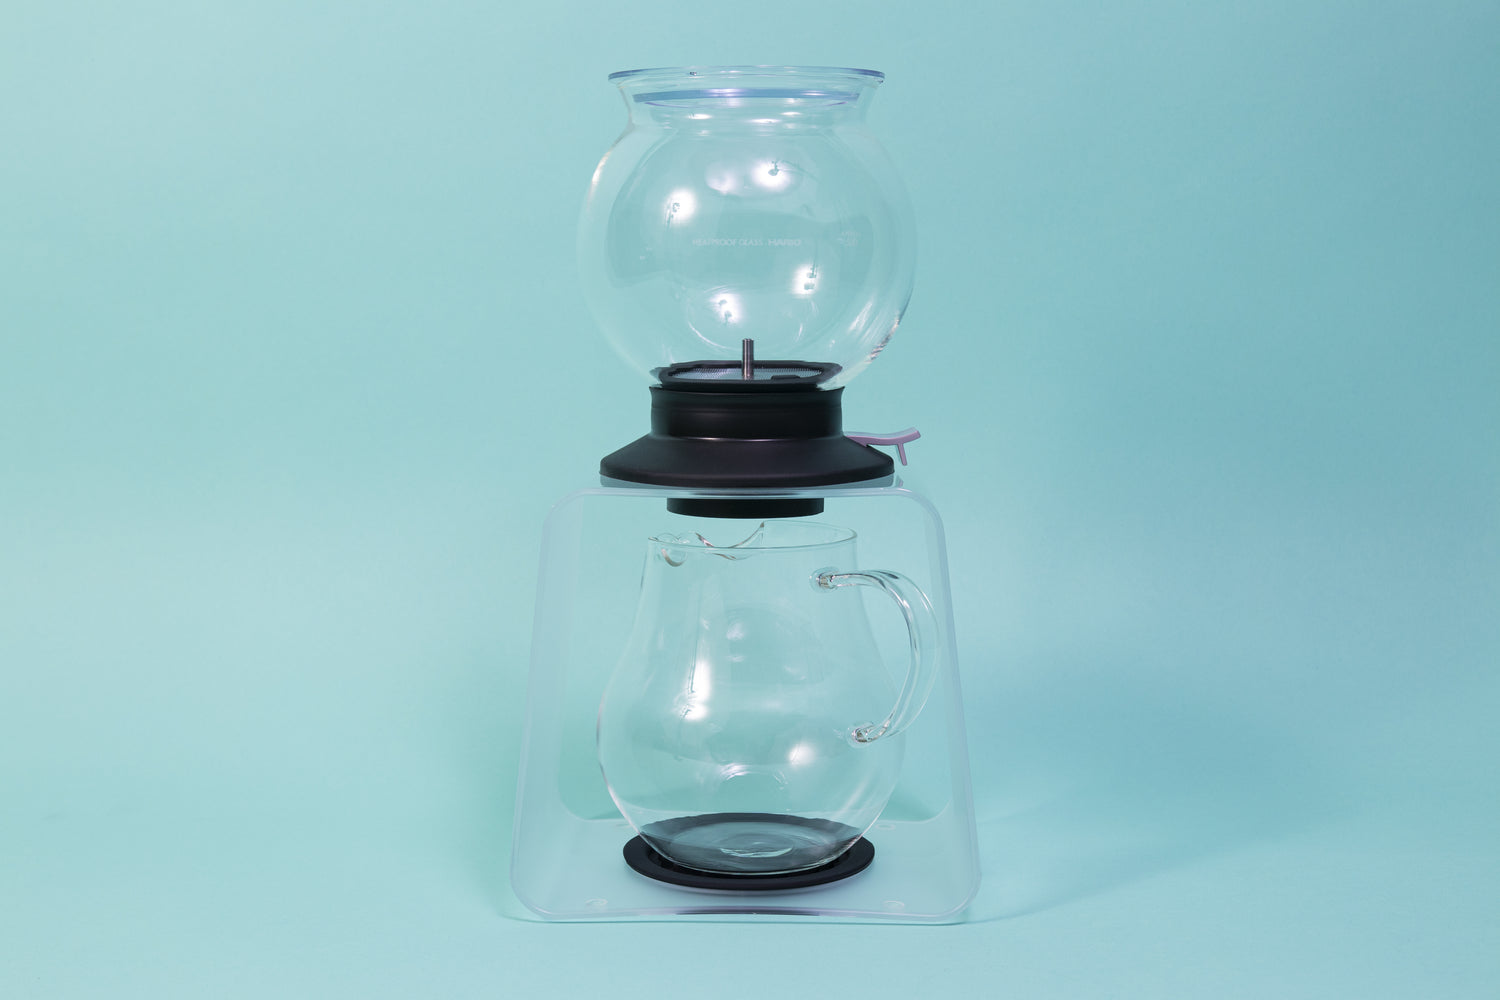 Globulous glass tear brewer and metal mesh filter with clear plastic lid atop a black rubber base with plastic lever switch on a clear acrylic stand above an all glass bulbous server with handle